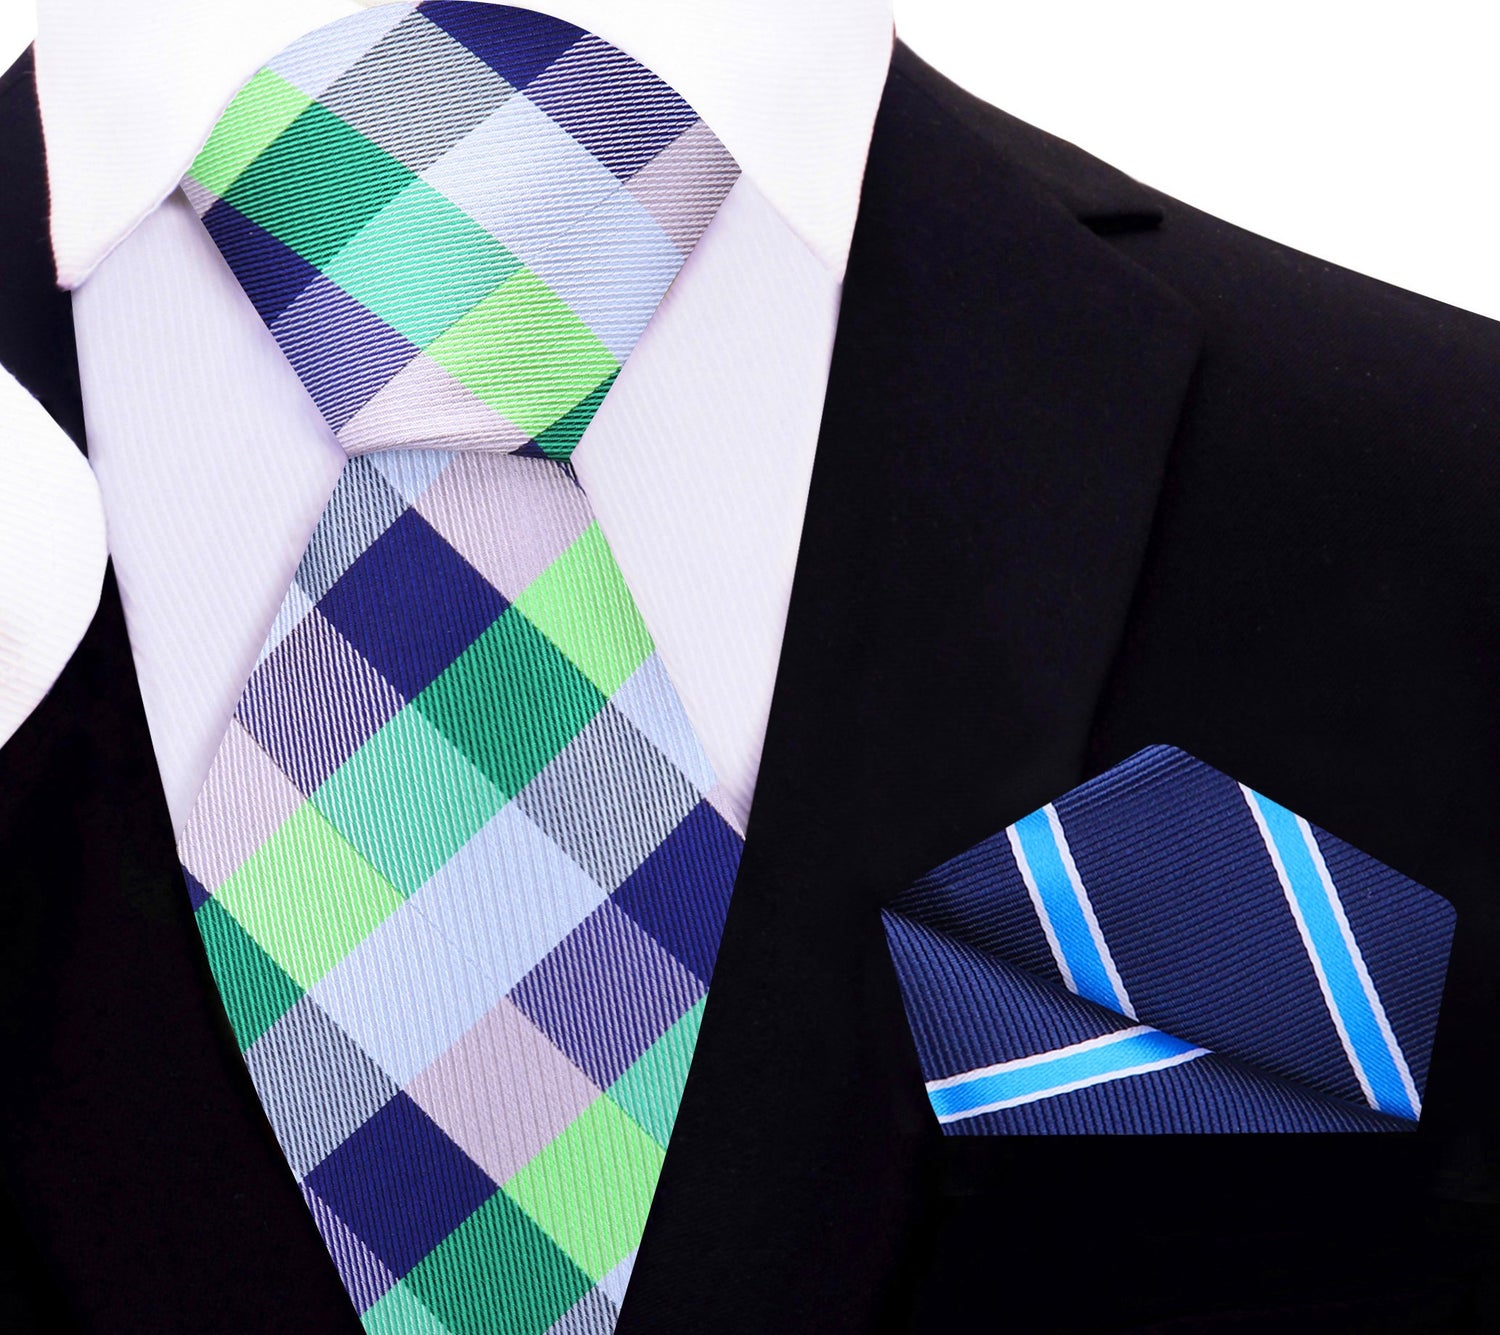 Green and Blue Check Tie and Accenting Blue Stripe Pocket Square